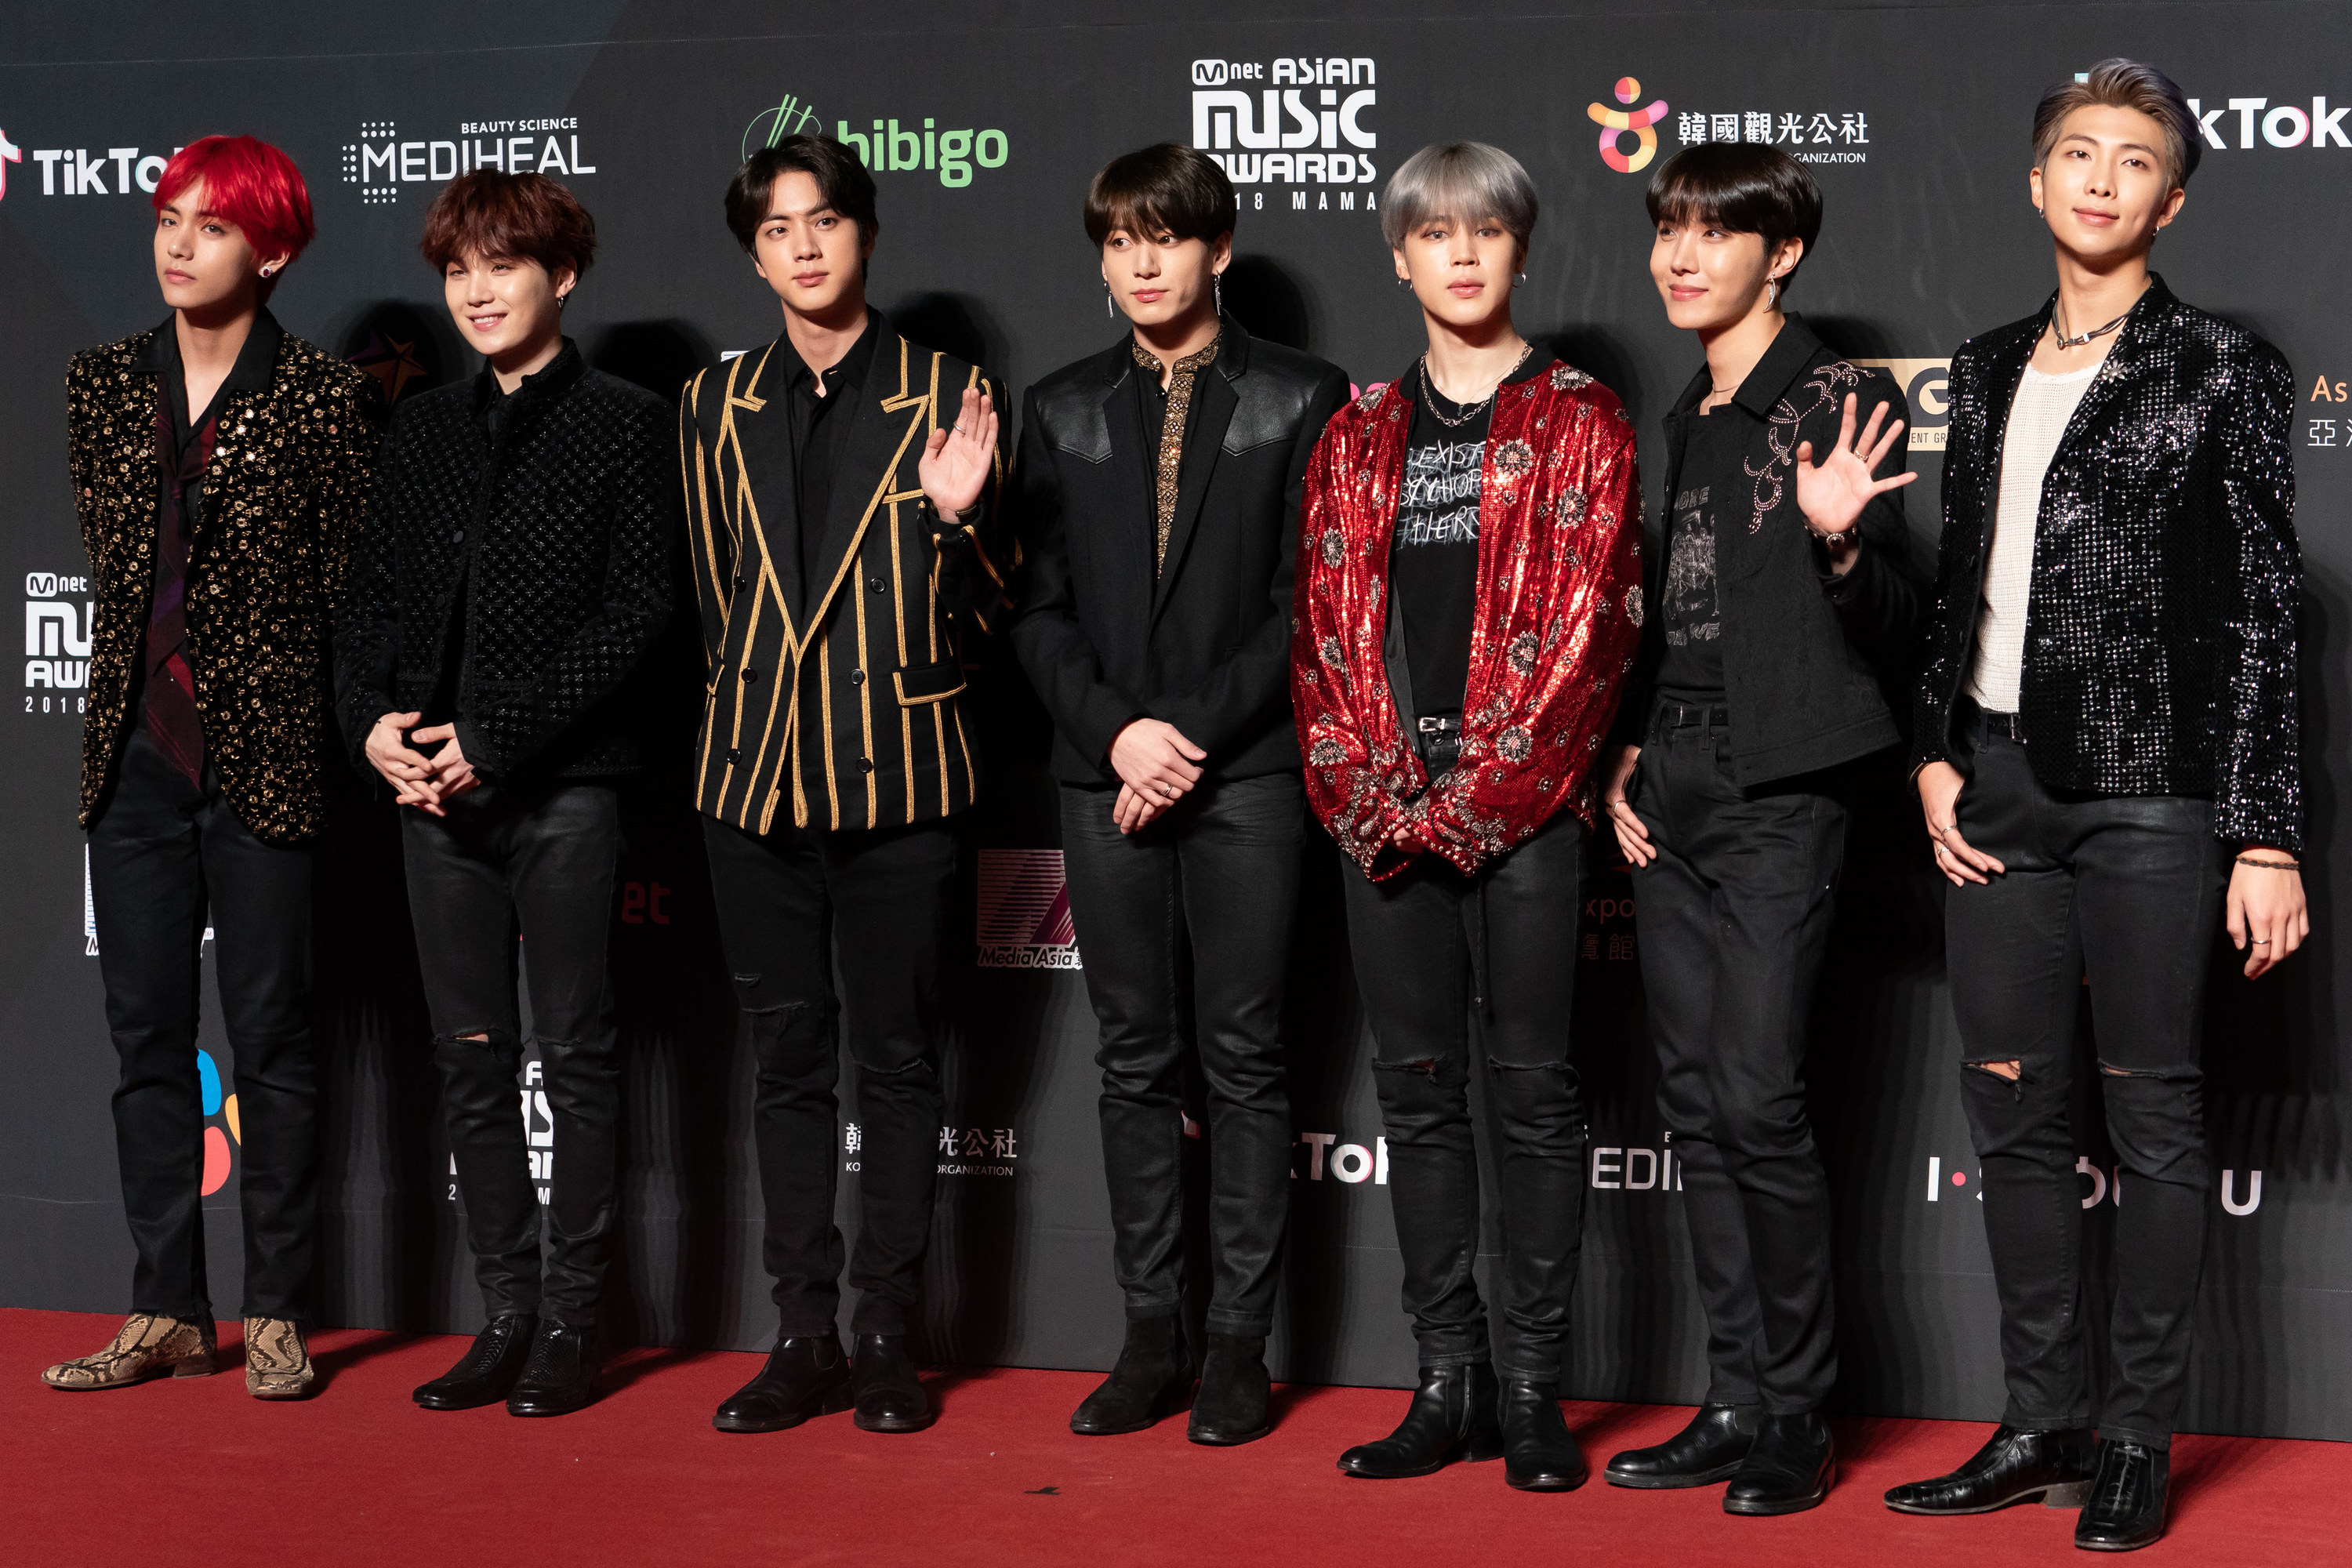 BTS all wear black leather trousers, some with small rips over the knees, but with a variety of blazers ranging from black with gold stars to gold pinstripes, leather shoulders, bright red with circular detailing, and black and covered in sequins